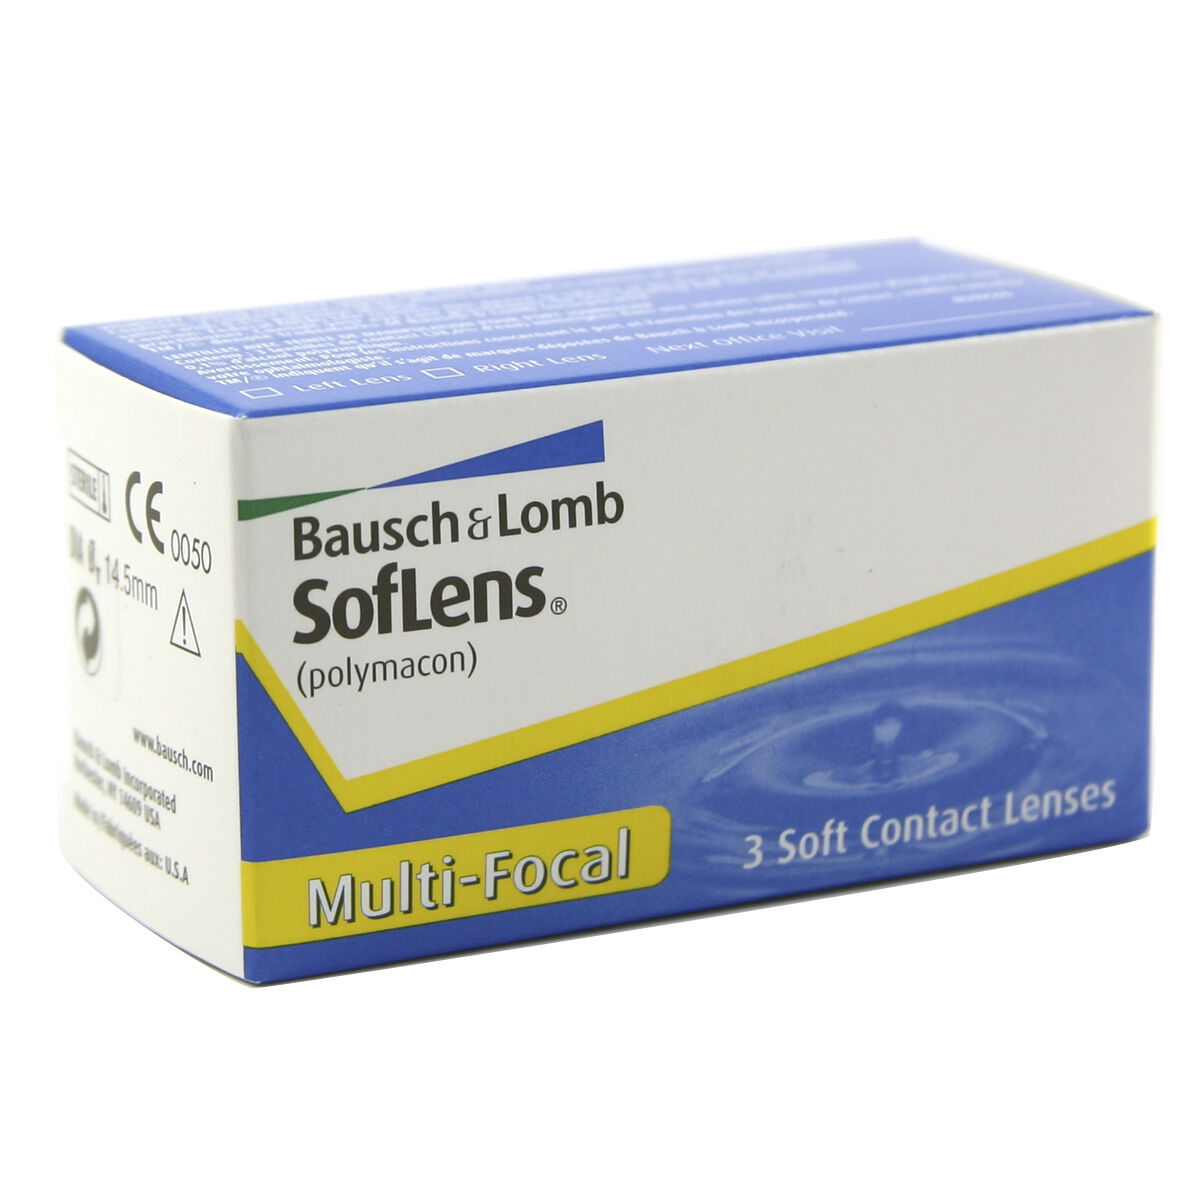 Bausch & Lomb Soflens Multi Focal (3 Contact Lenses), Bausch & Lomb, Monthly Multifocal Lenses, Polymacon